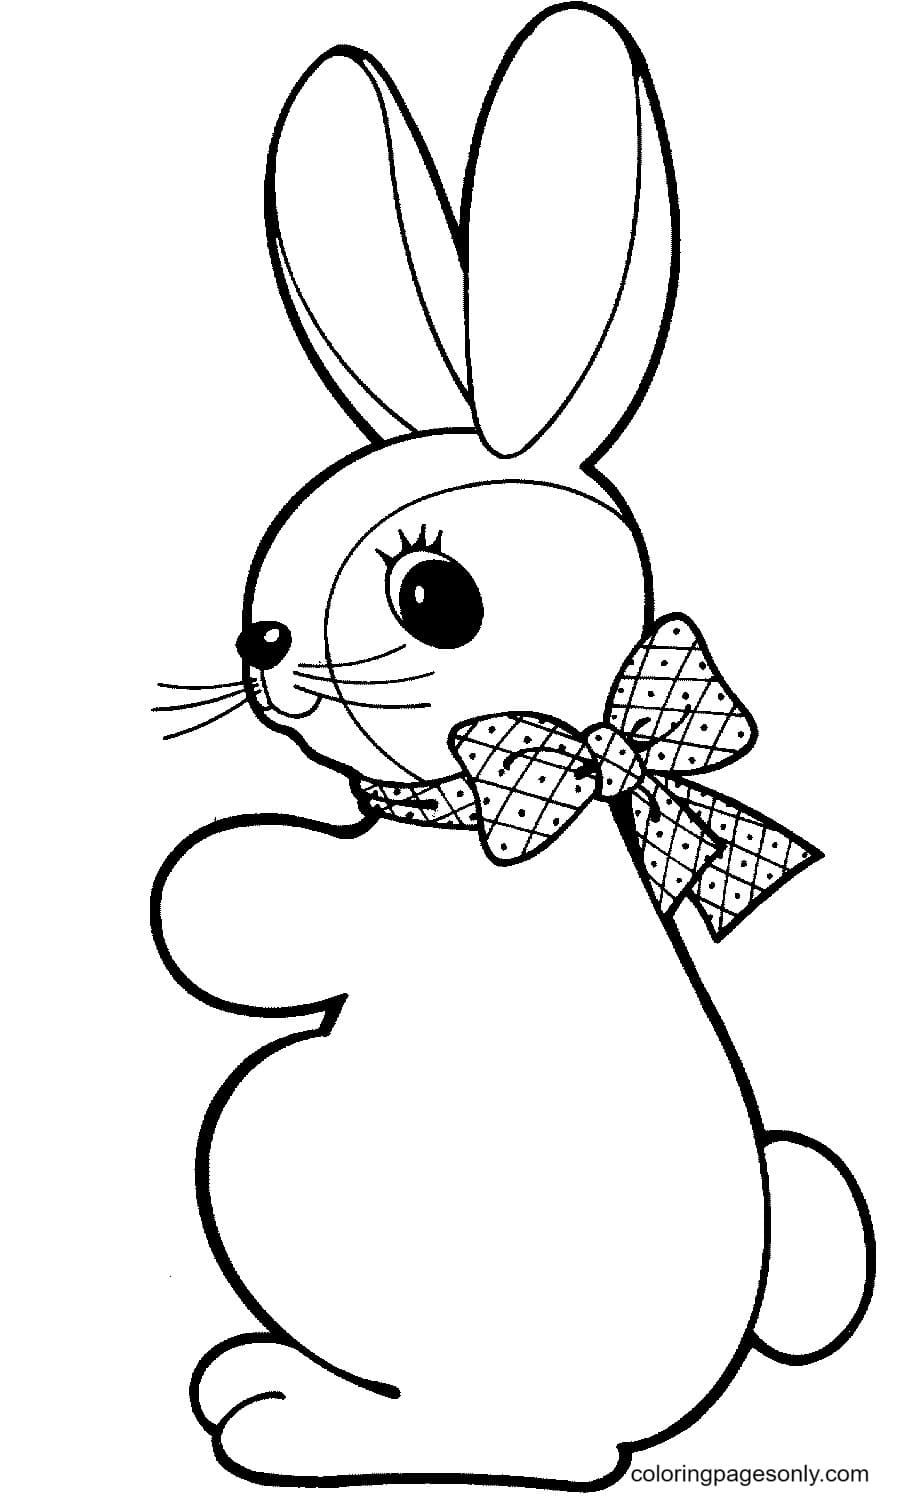 Cute Bunnies with Ribbon Coloring Pages